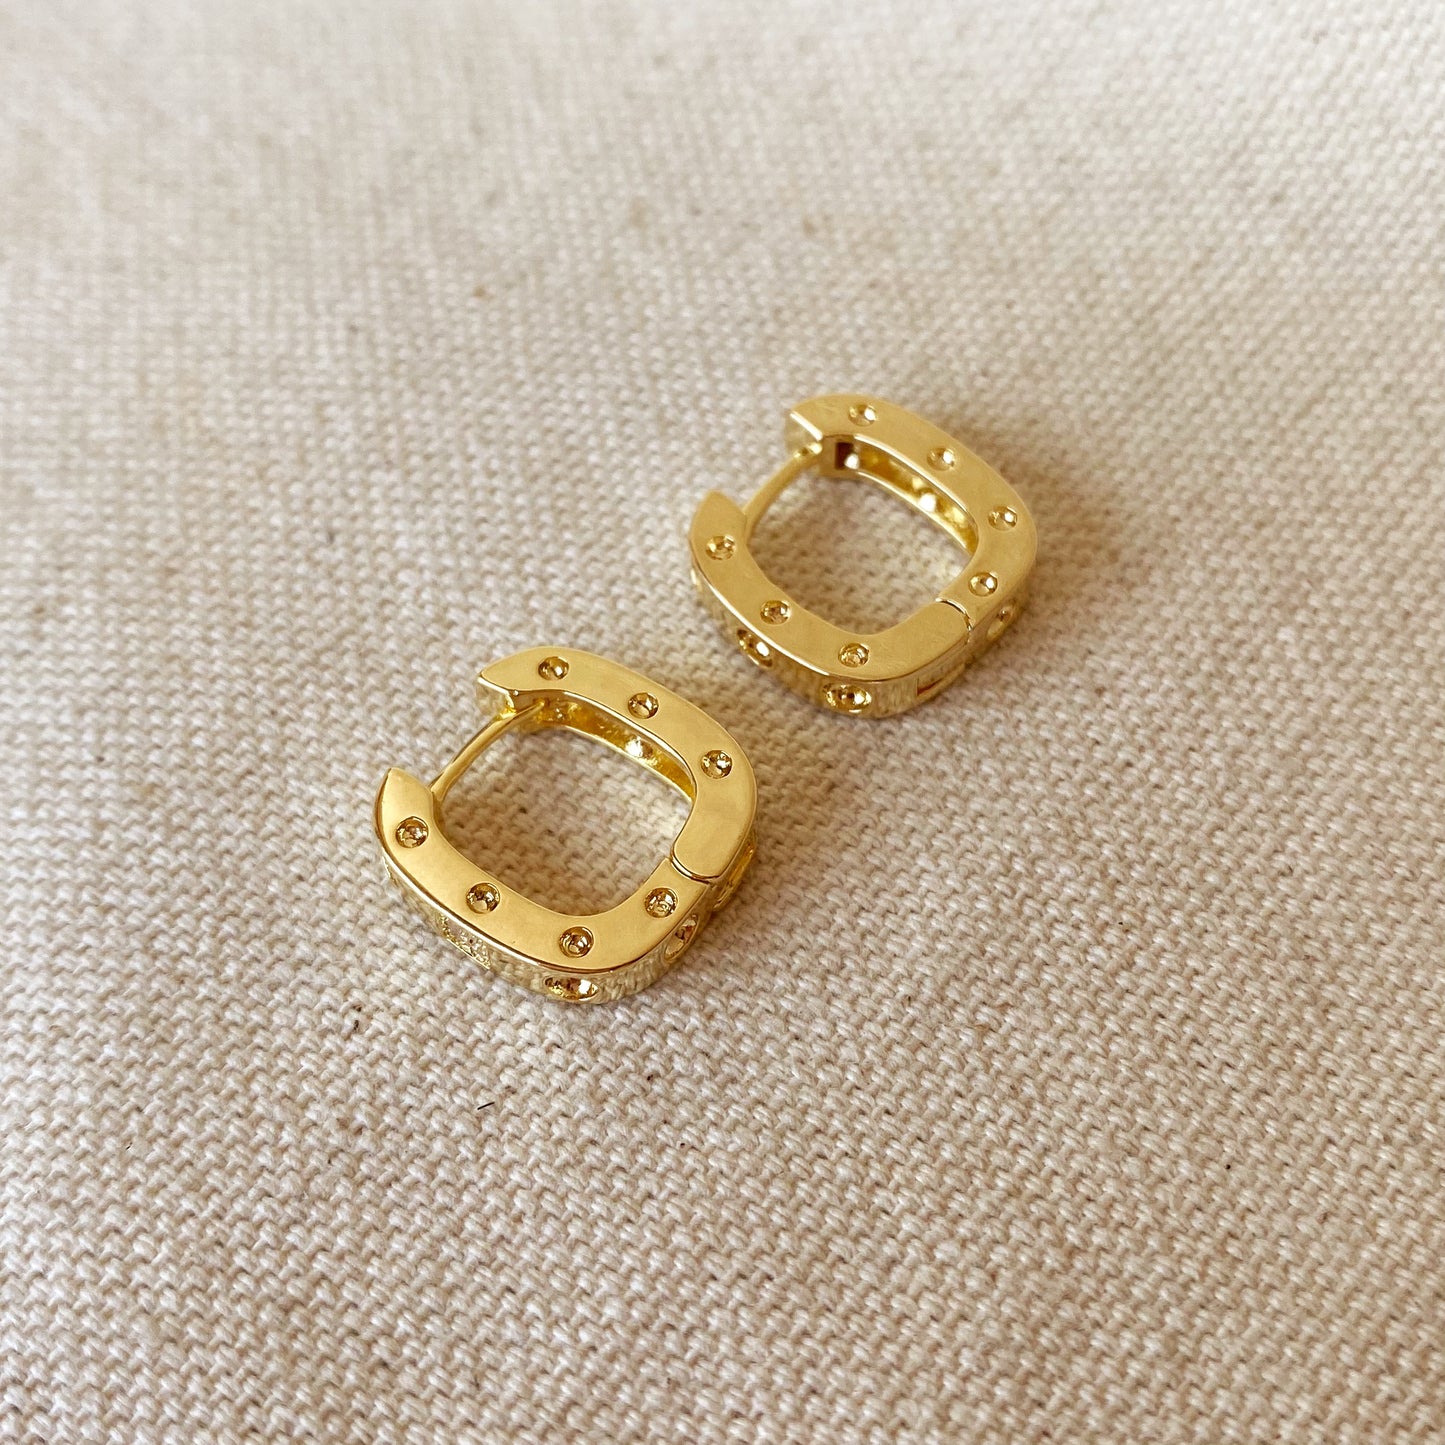 18k Gold Filled Small Rectangular Clicker Hoop Earrings With Cubic Zirconia Detail